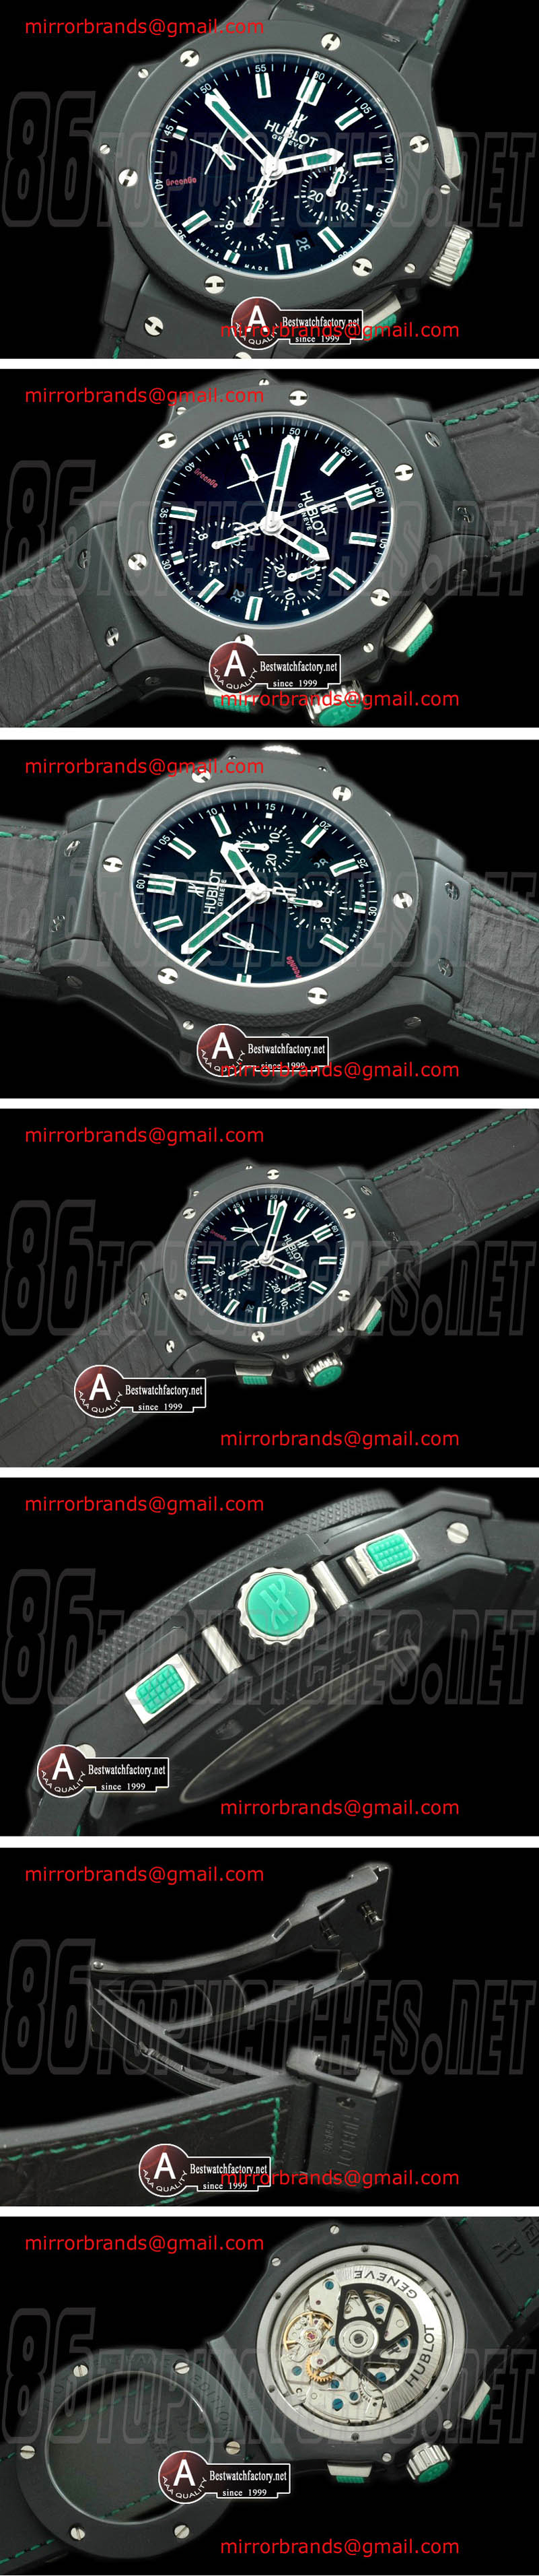 Luxury Hublot Big Bang "GreenGo" Special Ed Cer/Leather A-7500 28800 bph